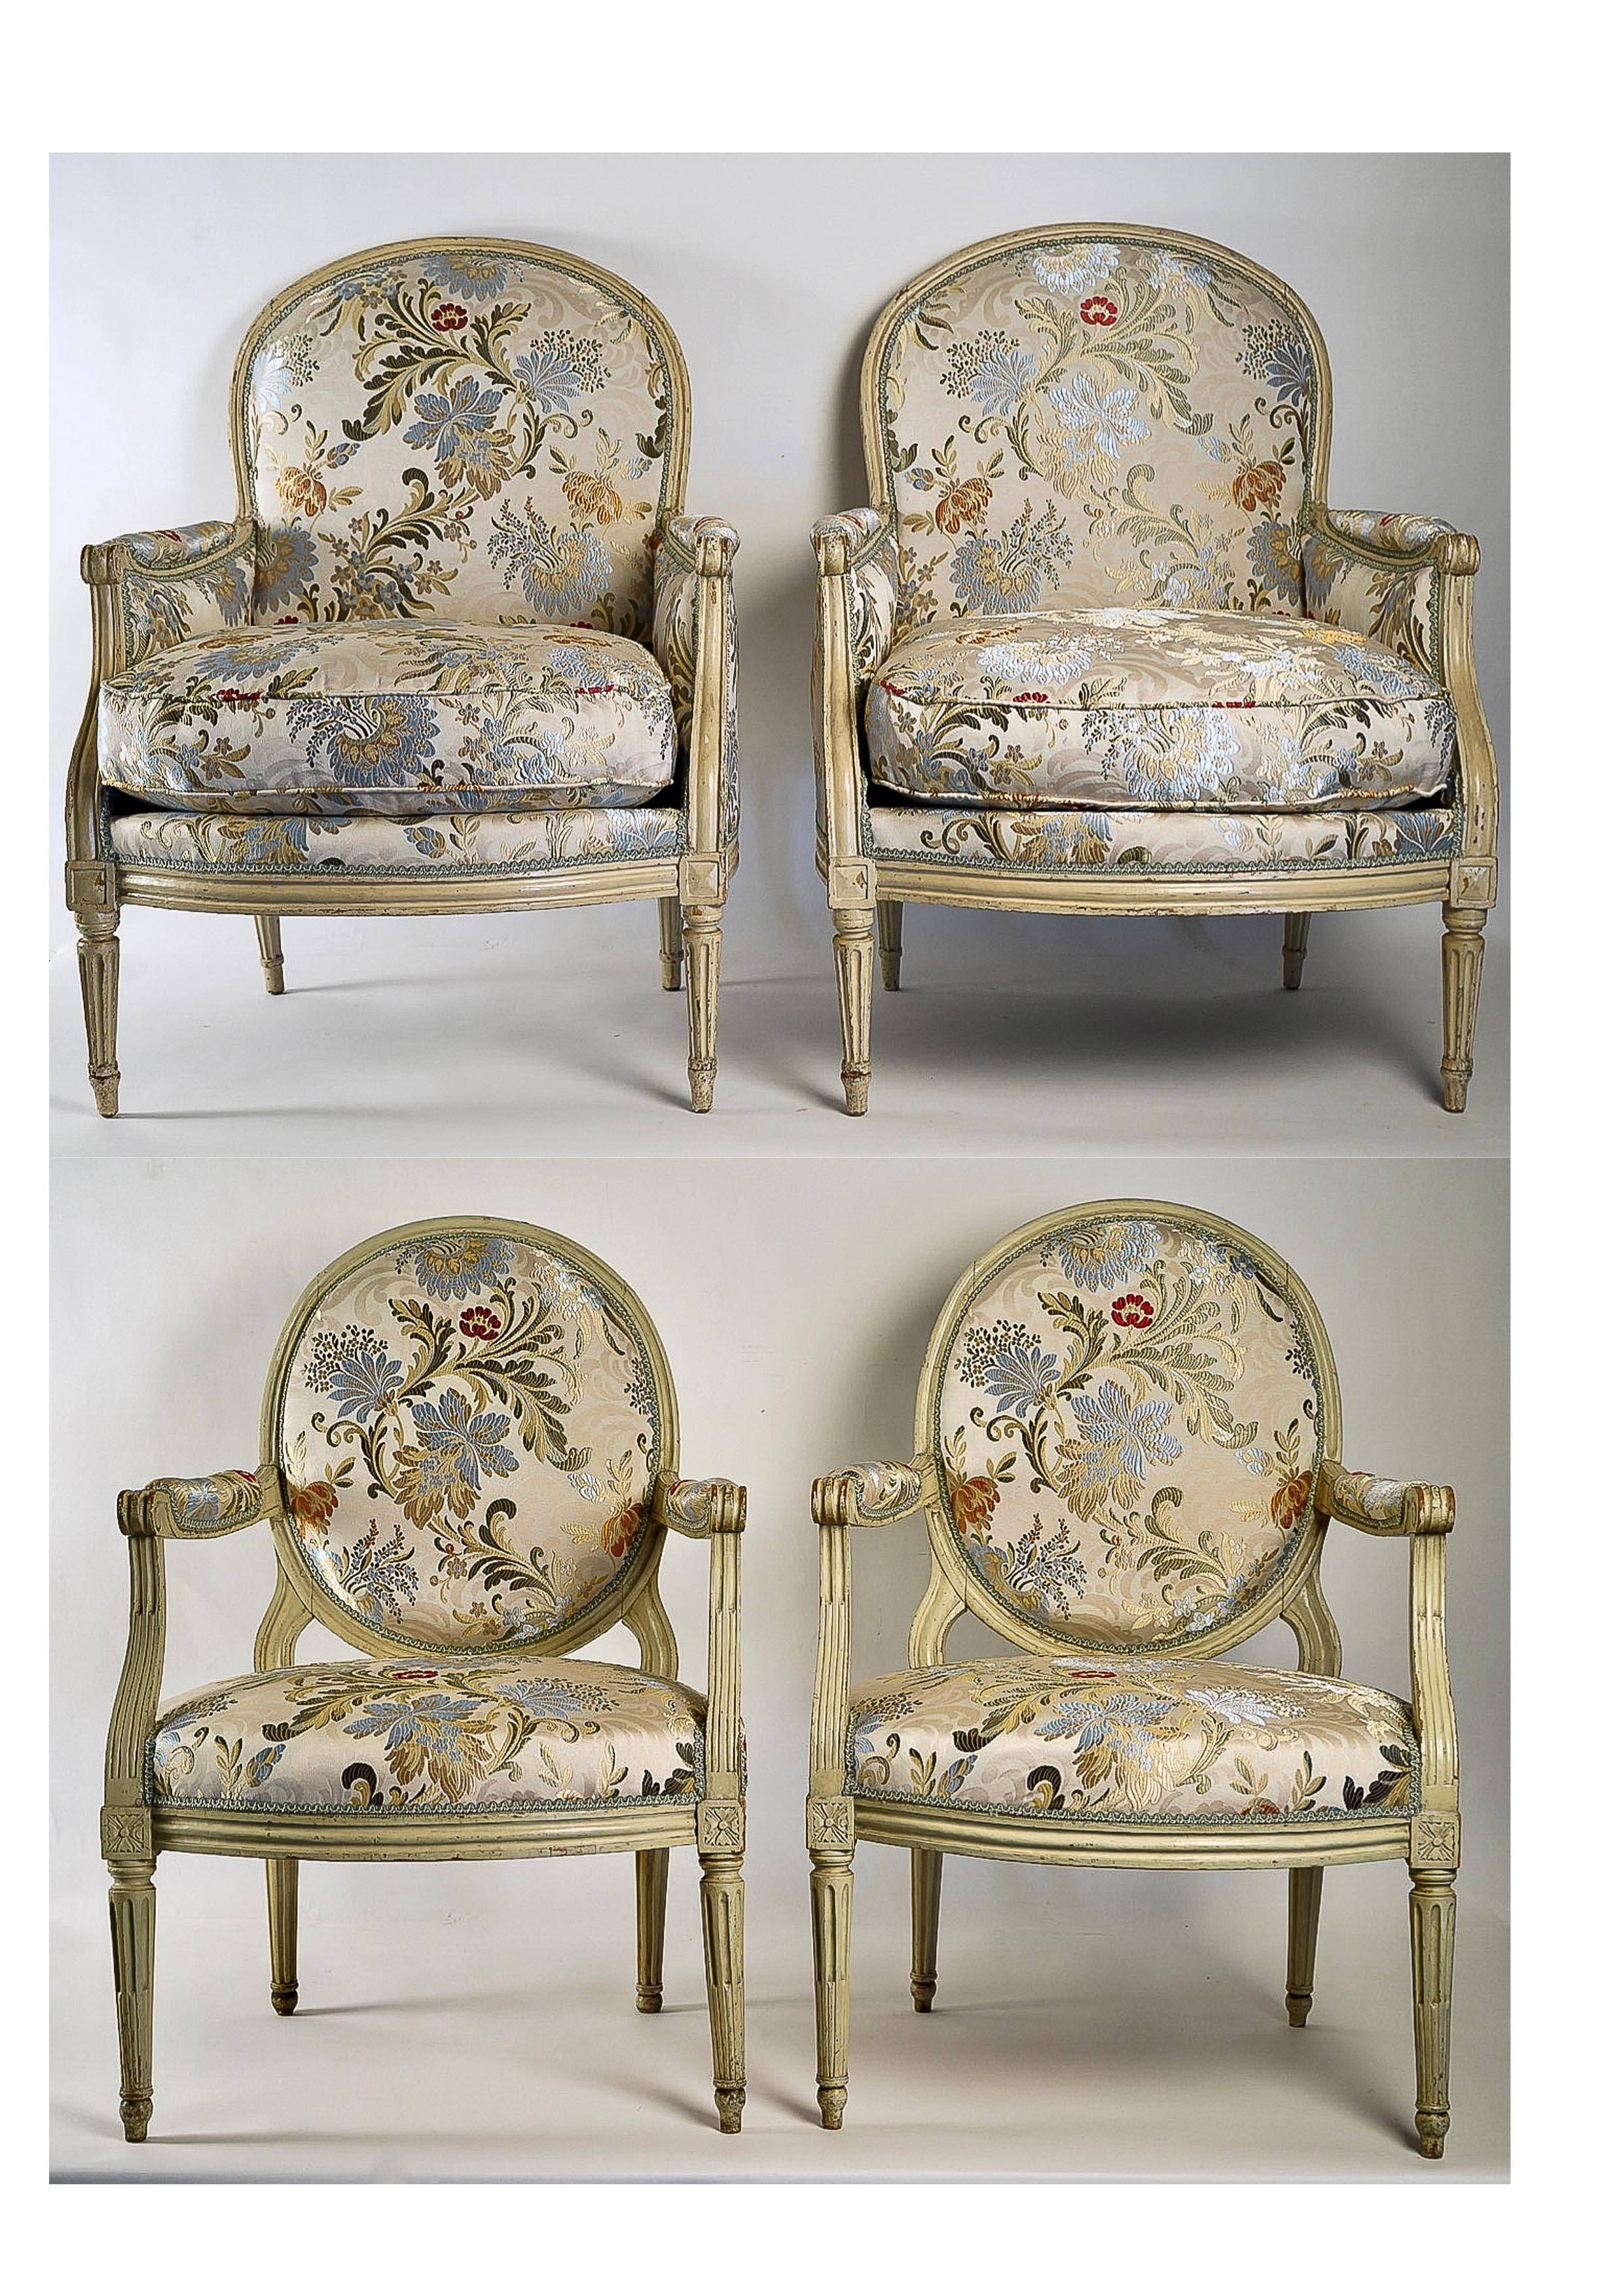 An beautiful four-piece Salon suite, hand-carved lacquered beechwood, the set is composed of a pair of large bergeres and two large armchairs.

French work in the classic Louis XVI period, late 18th century, circa 1780.

Excellent condition. These